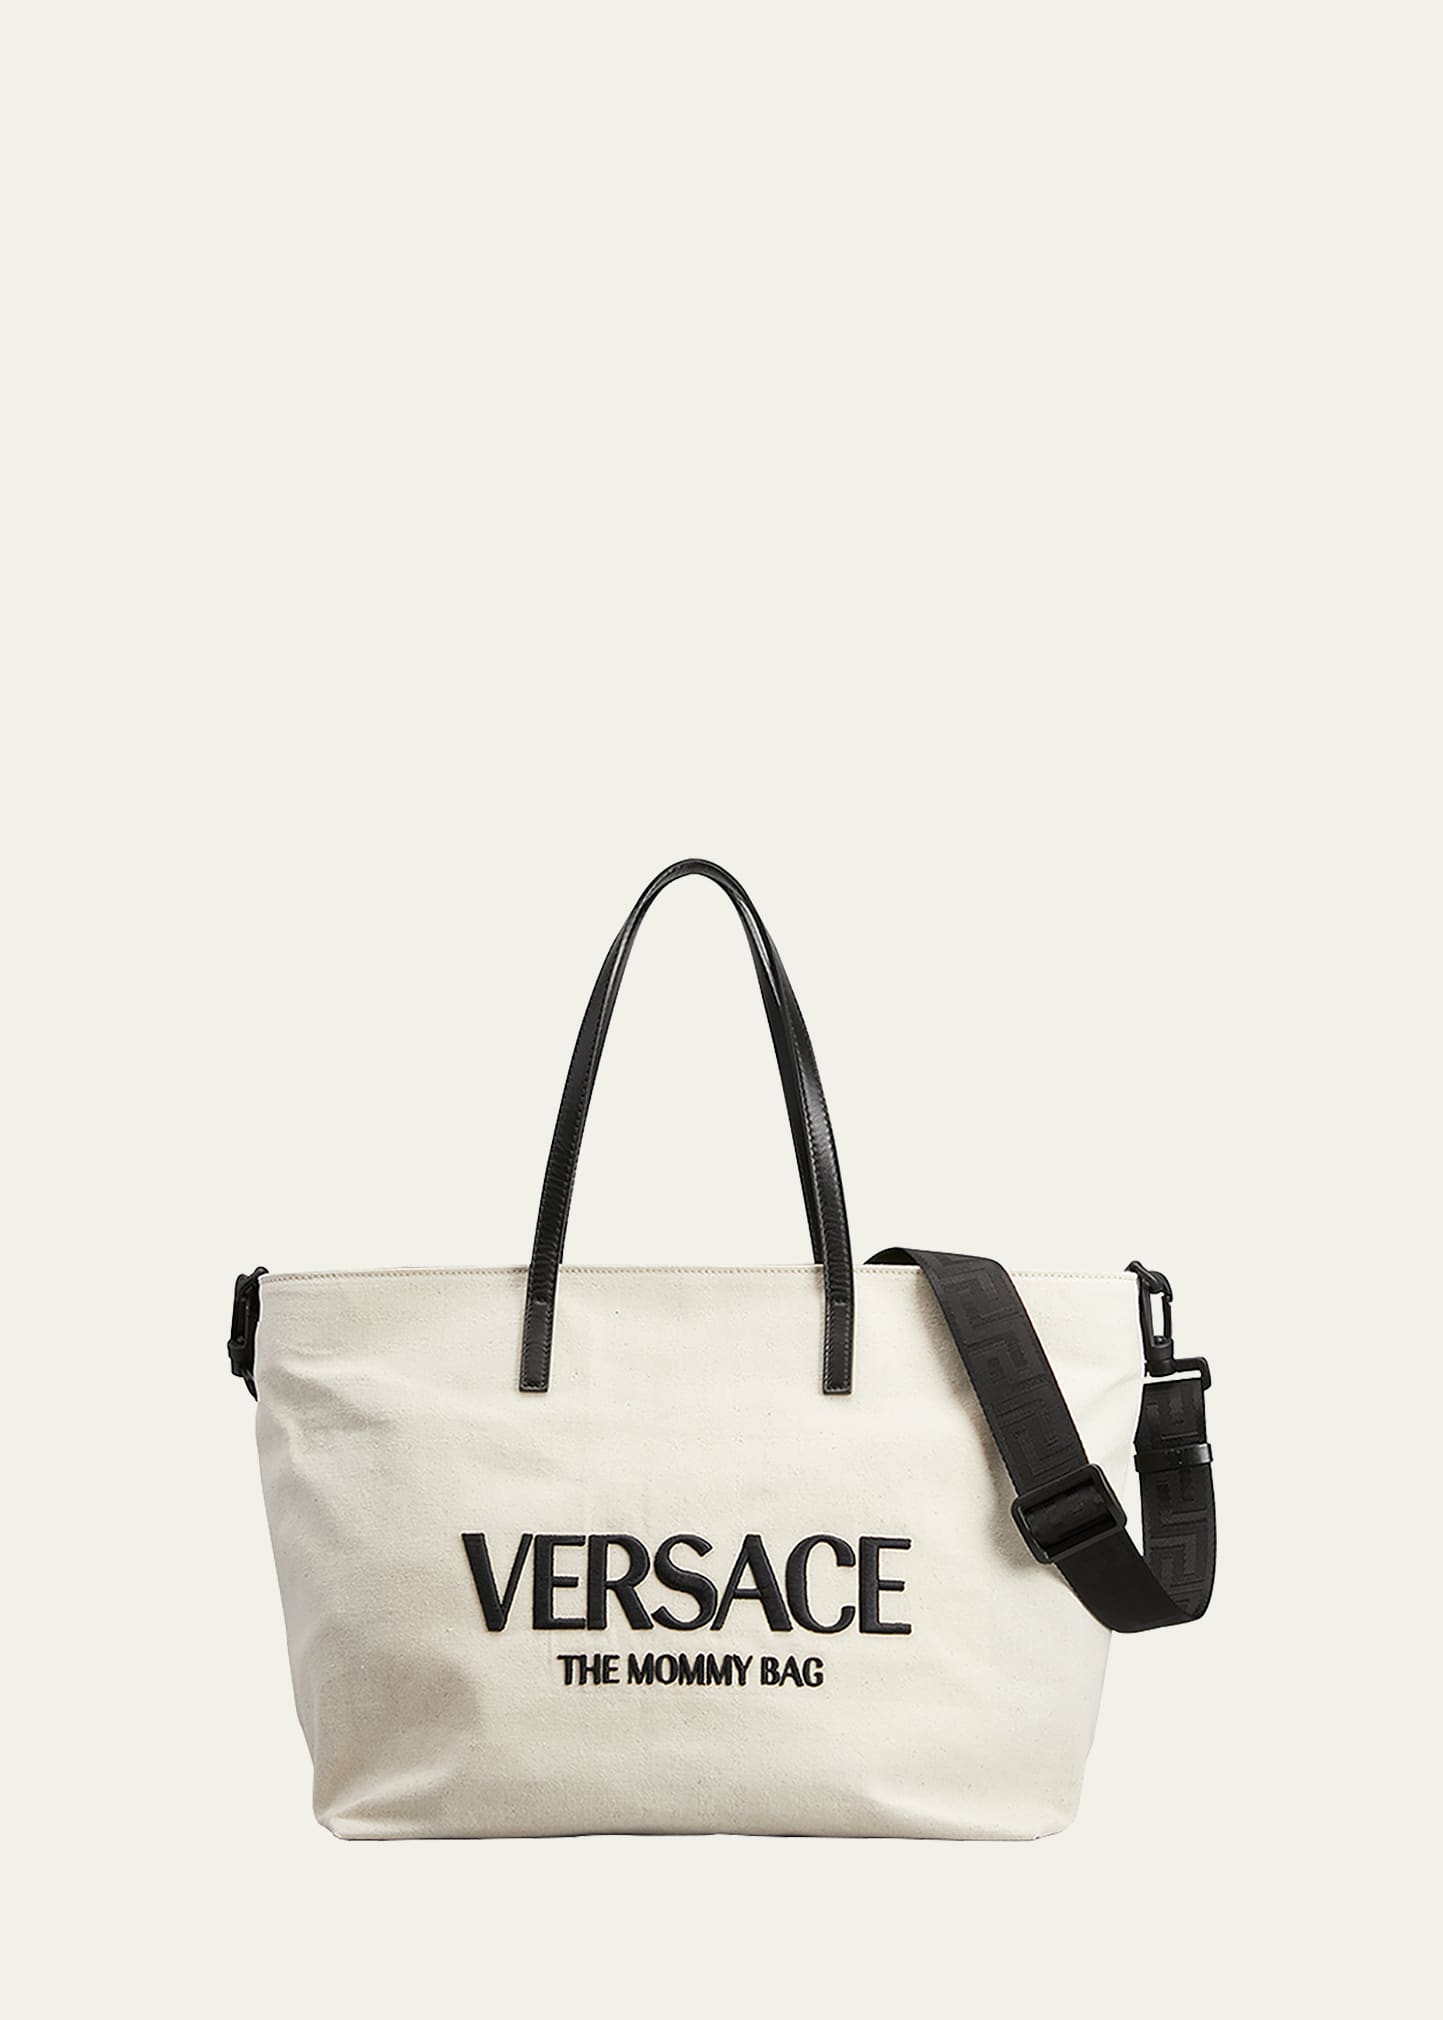 VERSACE THE MOMMY BAG DIAPER BAG